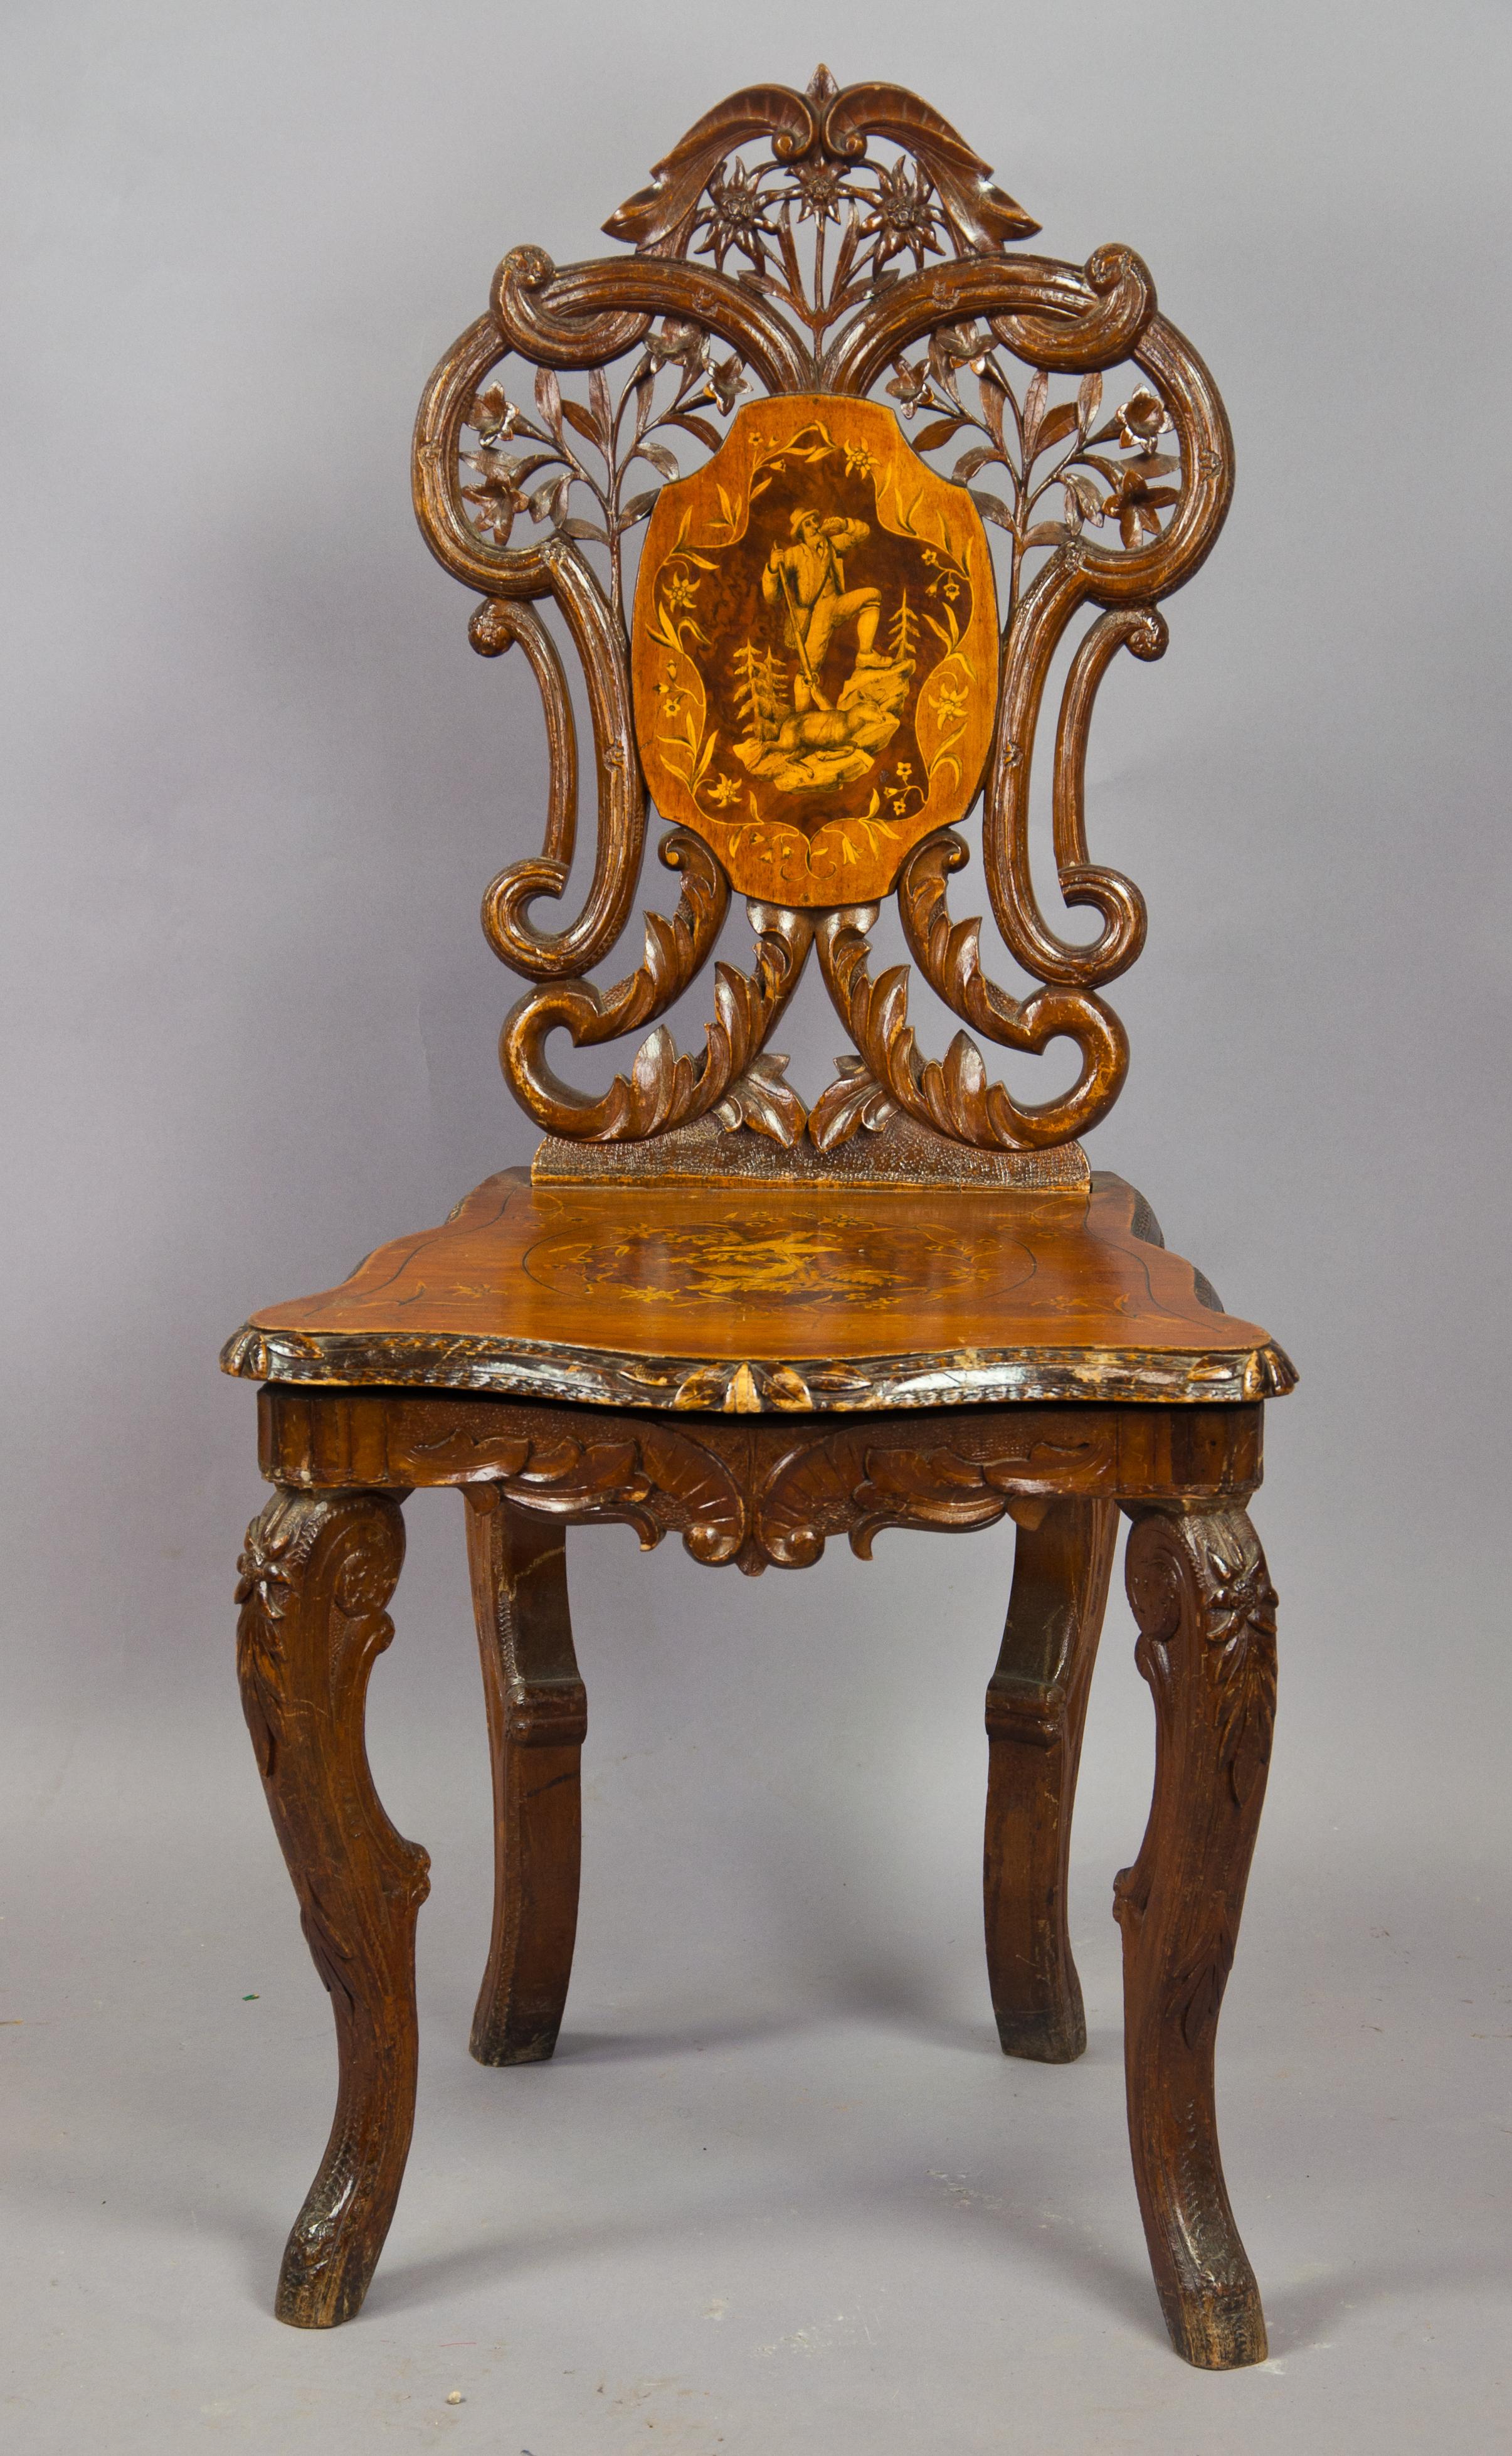 A finely carved walnut chair with inlaid seat and back. superb carved edelweiss, gentian and floral ornaments. Tilt-seat, inside a musical clock. Executed circa 1900, Swiss Brienz.

Measures: height 37.4